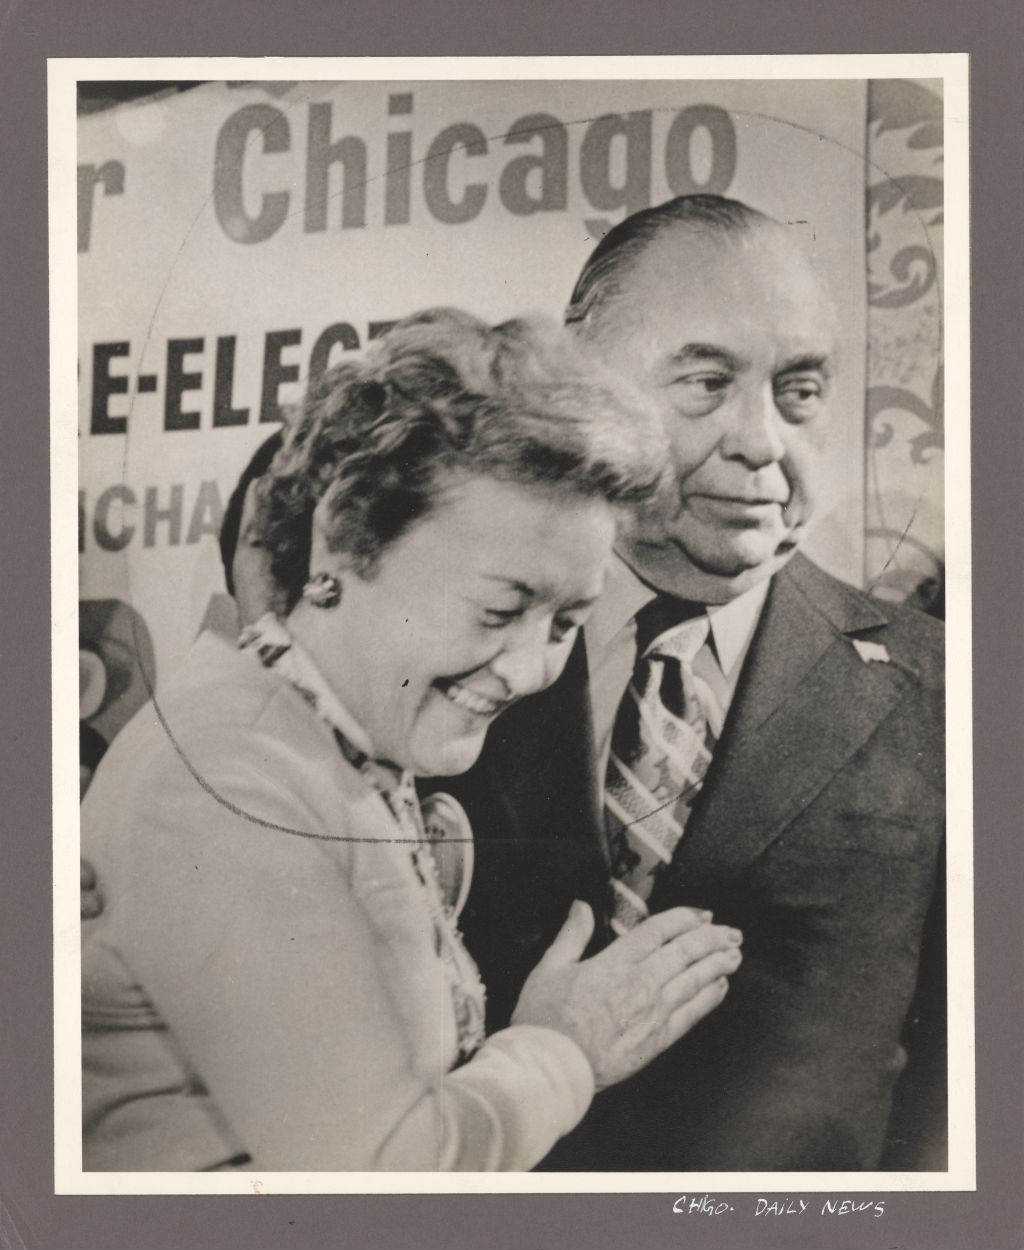 Miniature of Eleanor and Richard J. Daley on mayoral primary election night